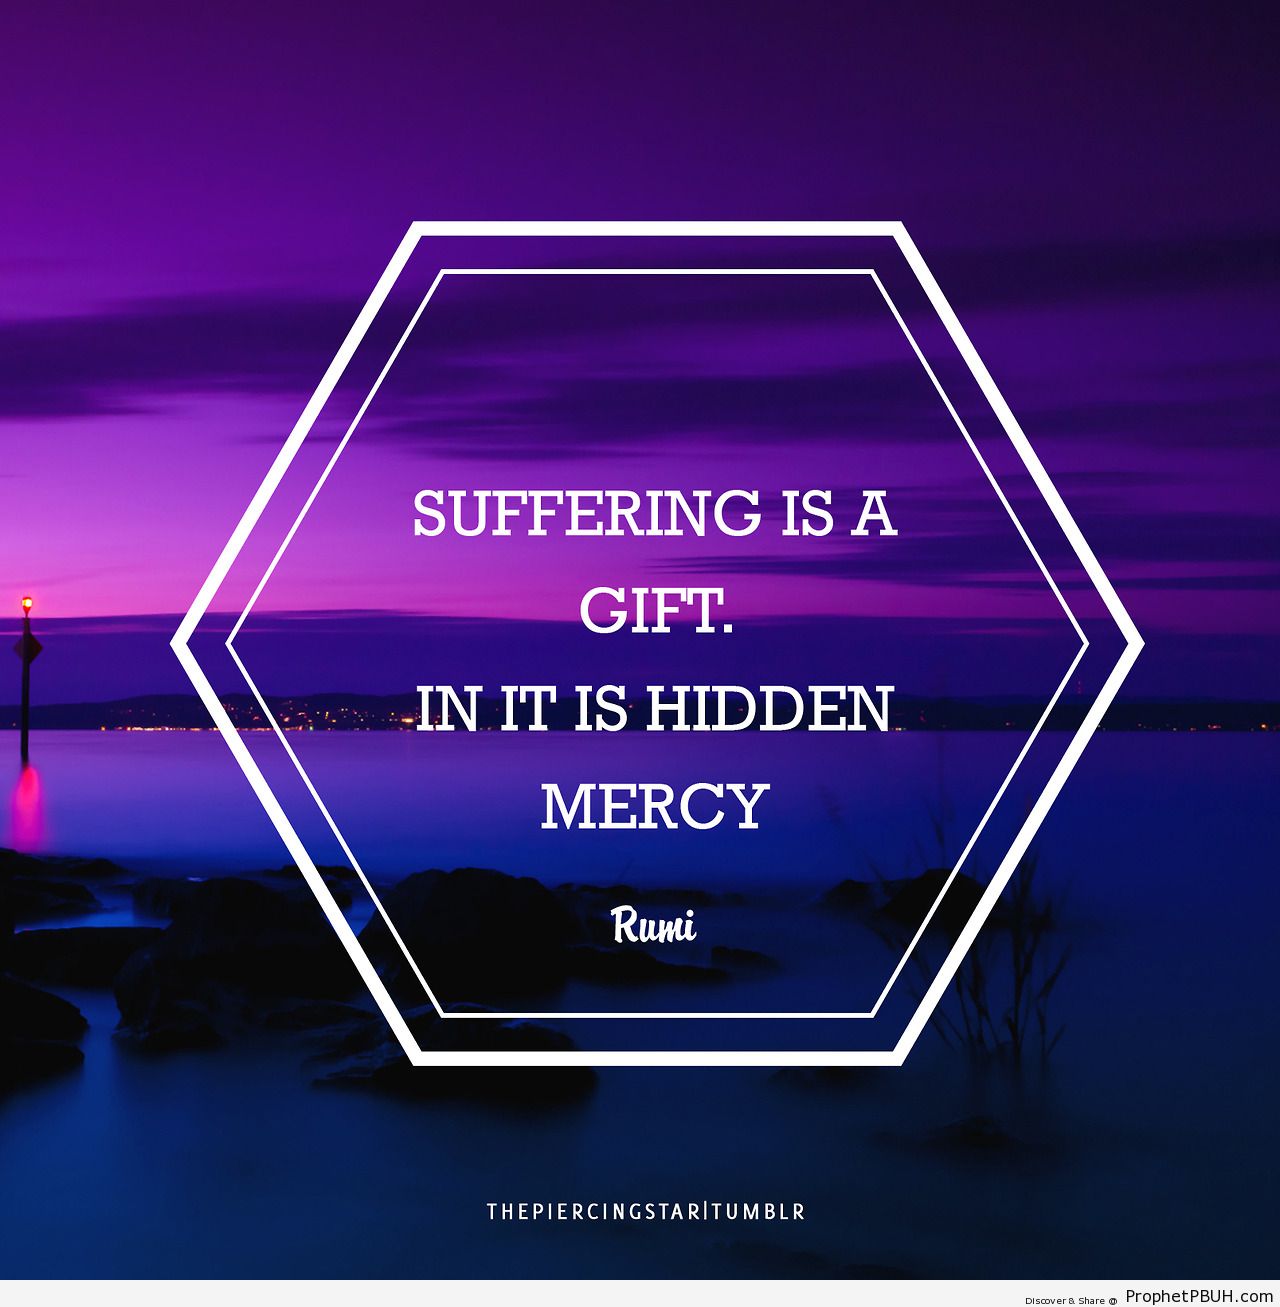 Suffering is a gift - Islamic Quotes, Hadiths, Duas